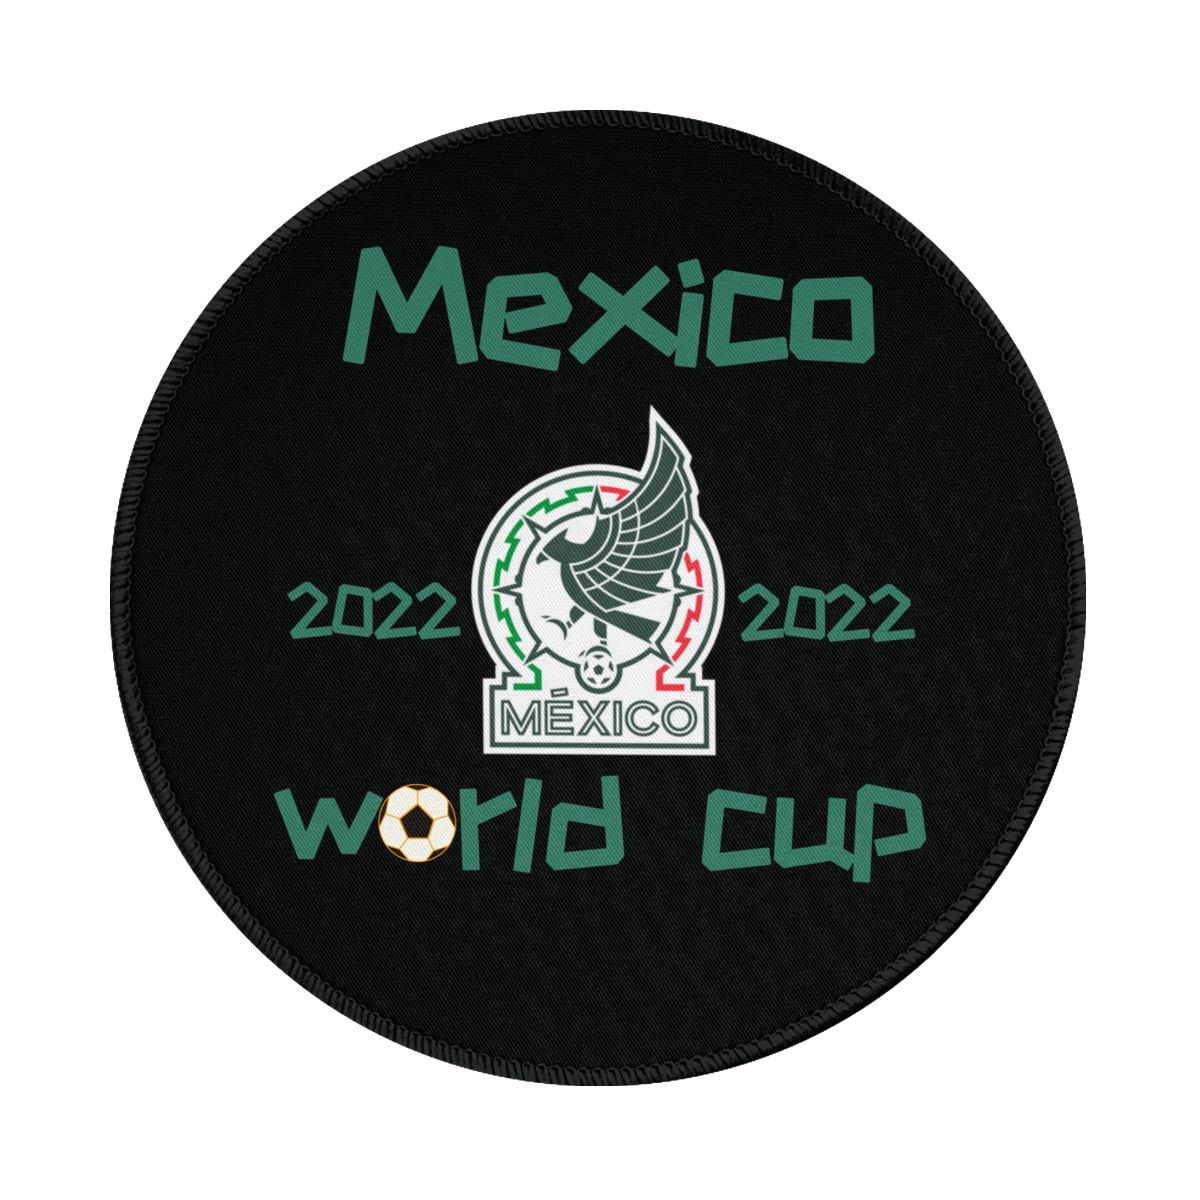 Mexico 2022 World Cup Team Logo Round Non-Slip Thick Rubber Modern Gaming Mousepad